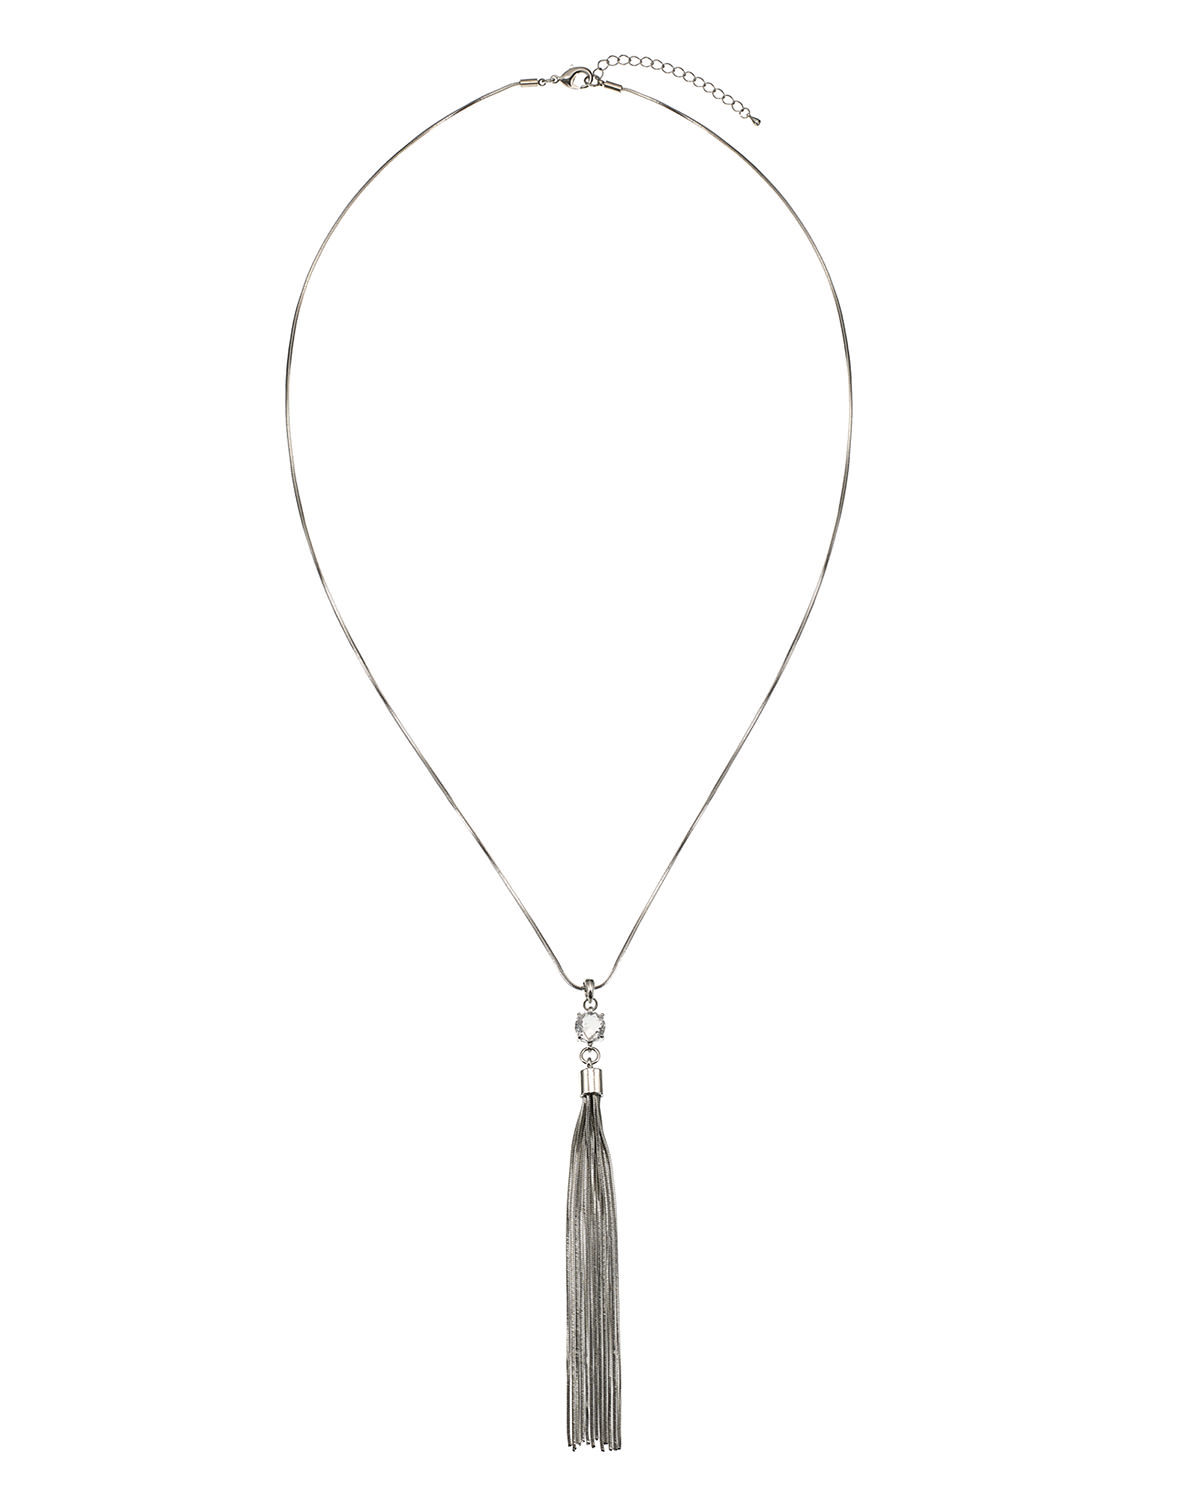 Necklace, was £29, now £17.40, Phase Eight. Saving 40%